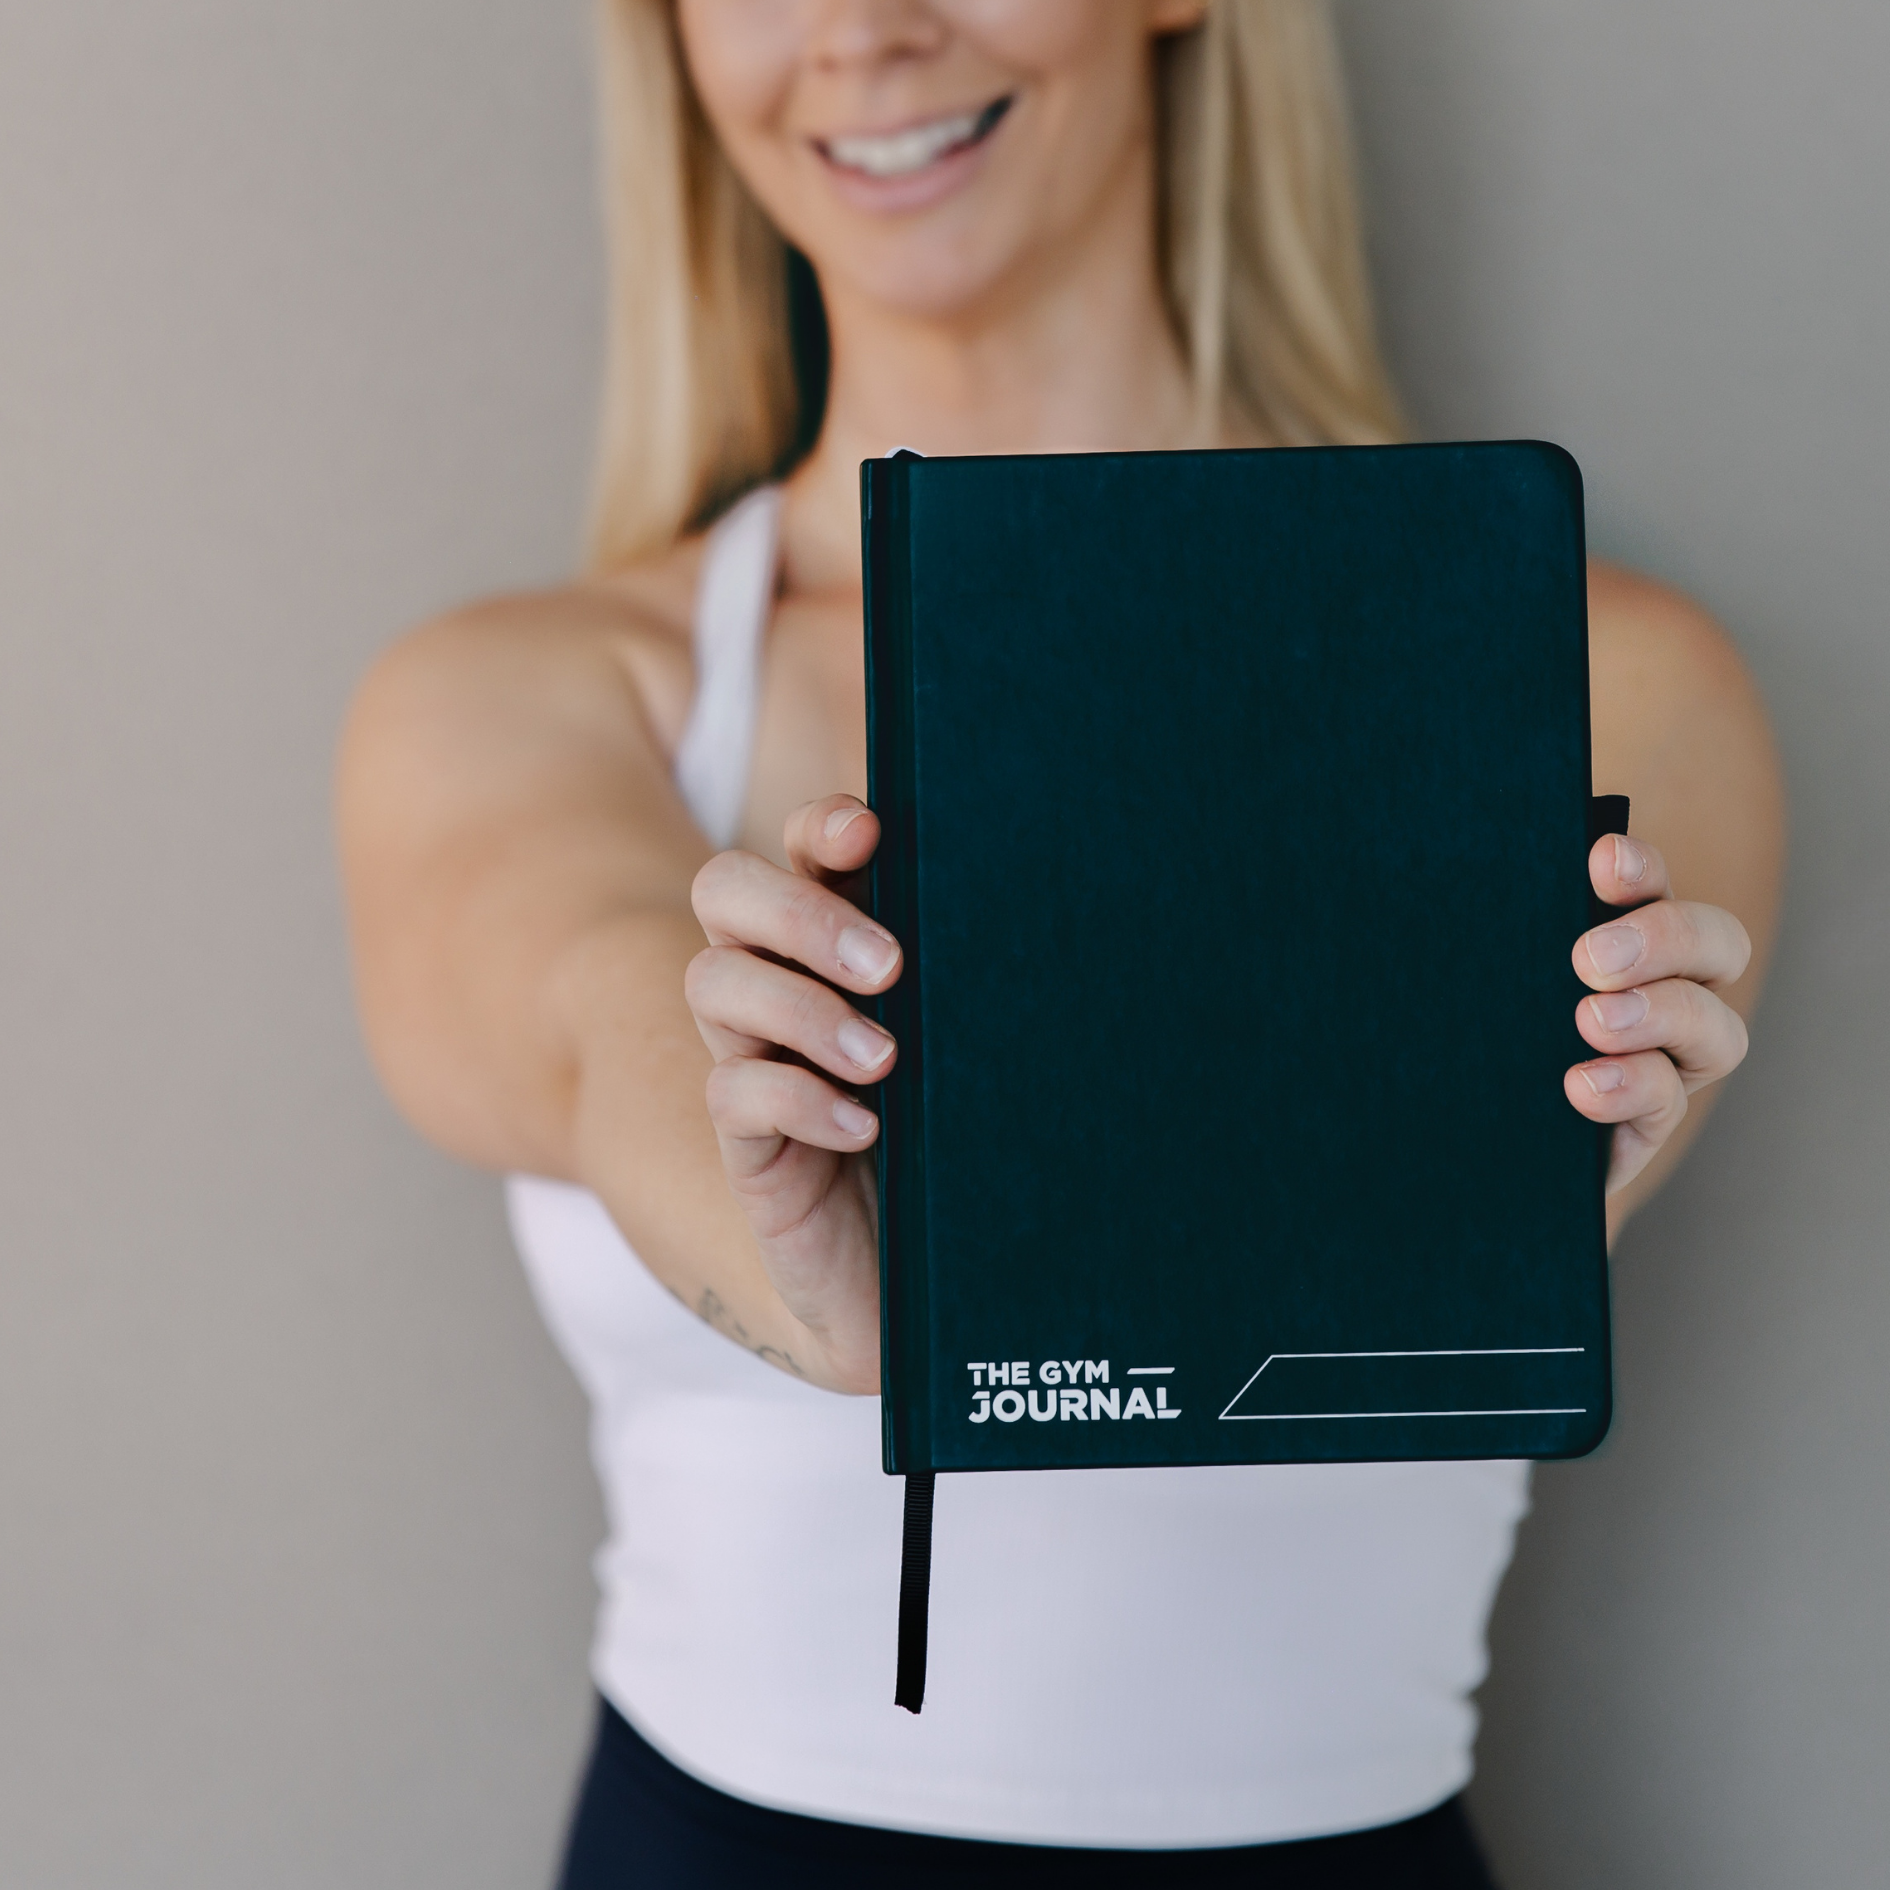 The Gym Journal 2.0